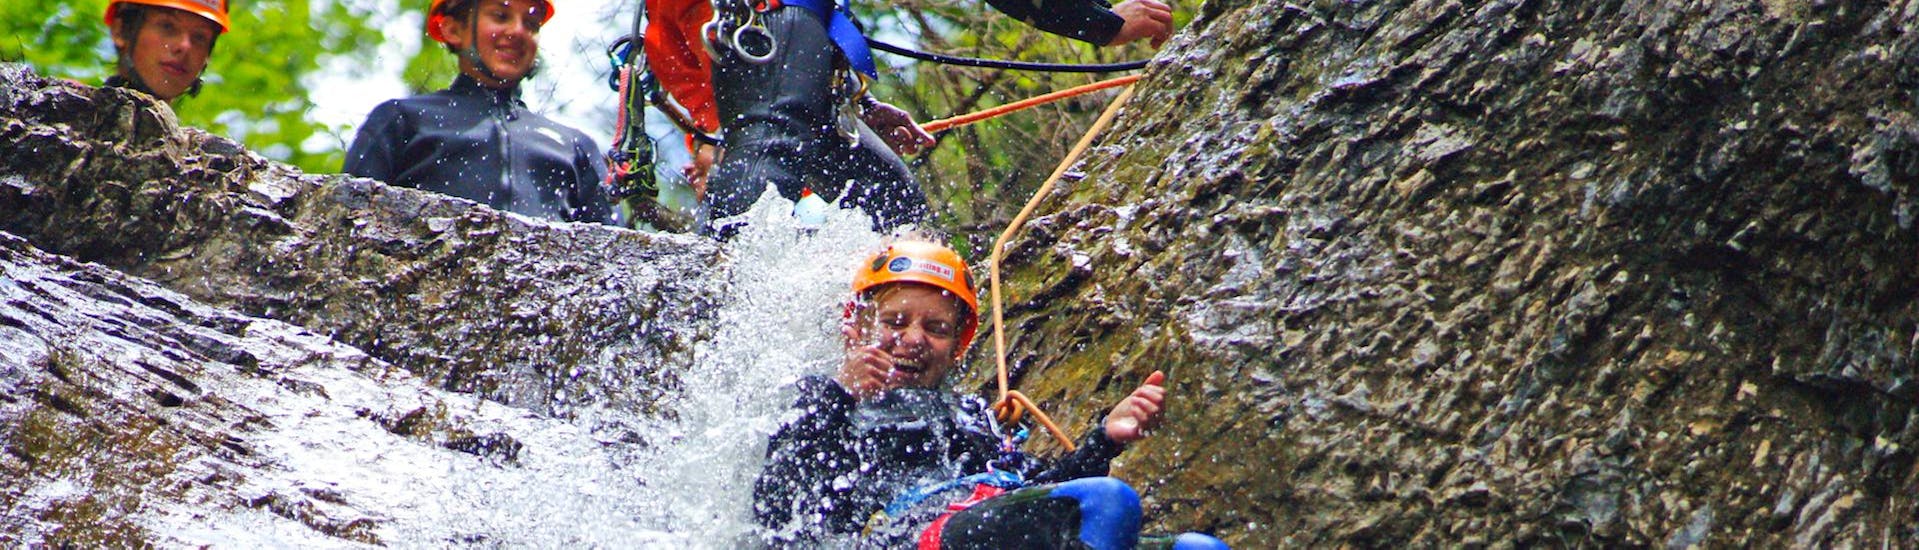 Canyoning am Erbsattel - Funtastic Tour.